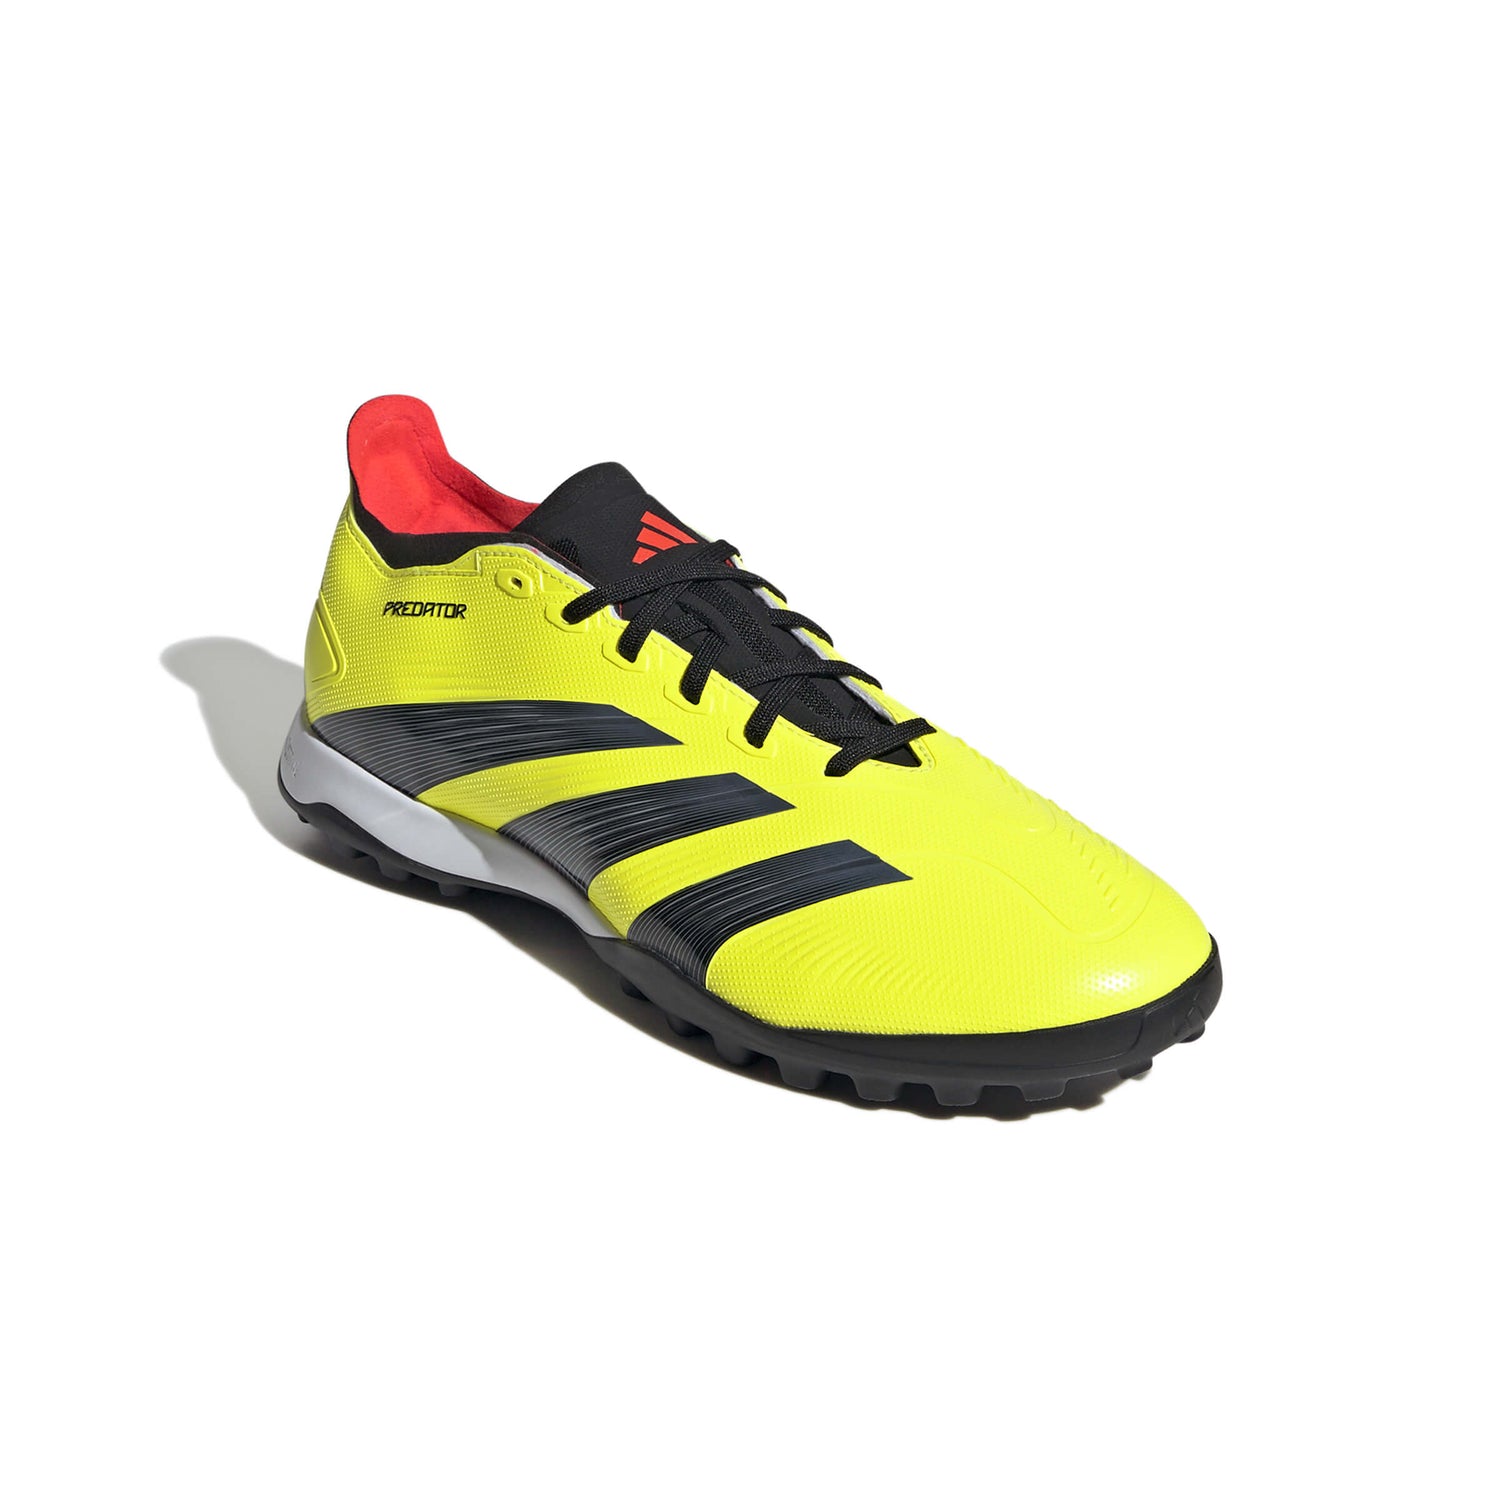 adidas Predator League Turf - Energy Citrus Pack (SP24) (Lateral - Front)